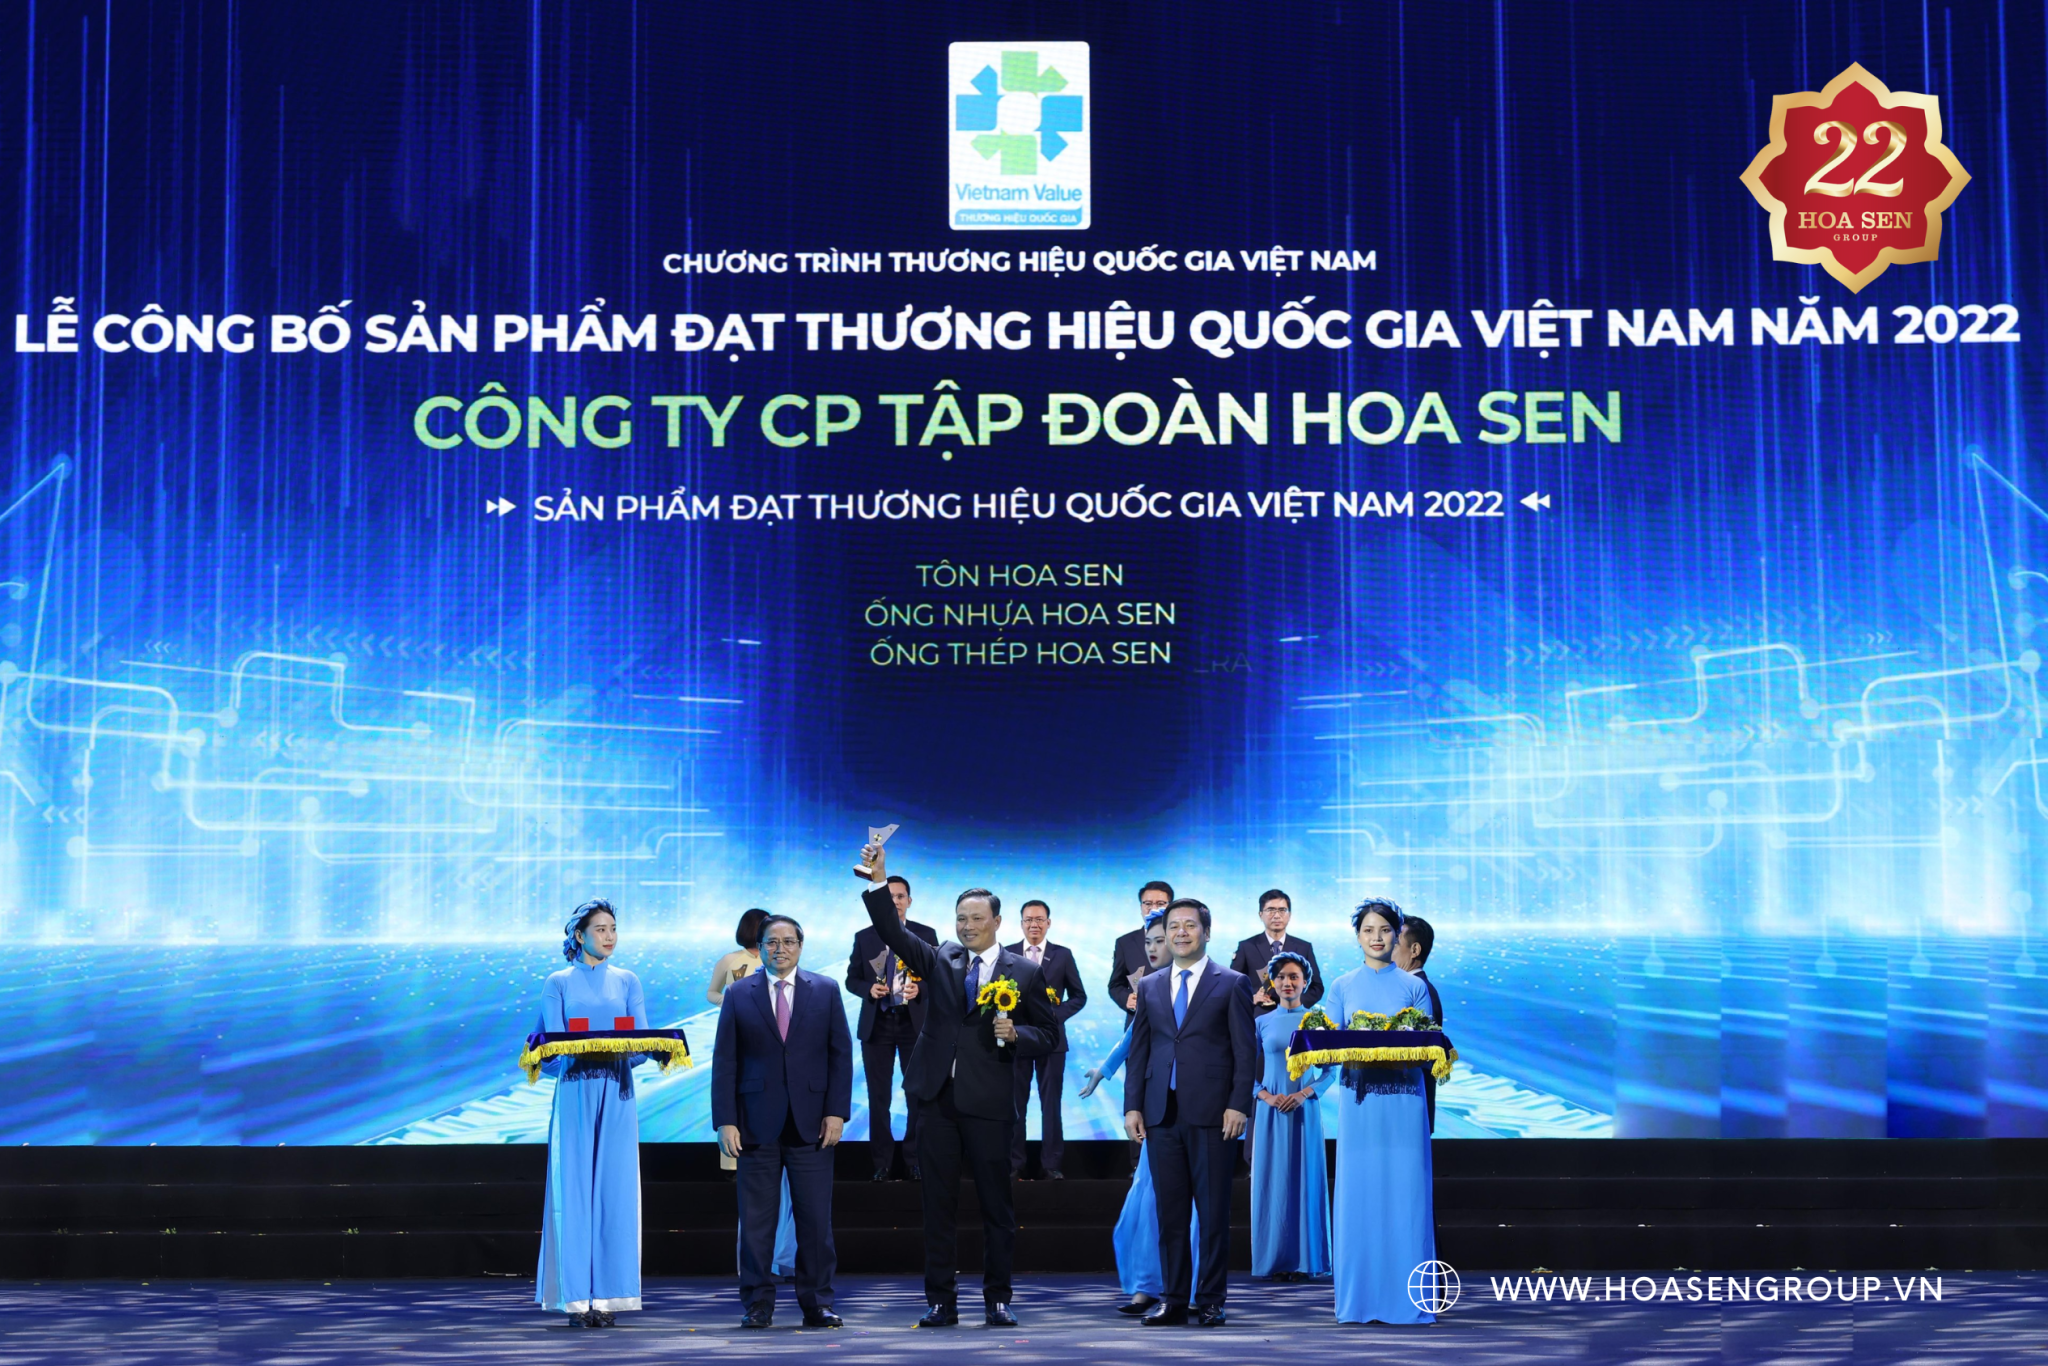 Prime Minister Pham Minh Chinh and Minister of Industry and Trade Nguyen Hong Dien awarded the 2022 National Brand logo to Mr. Nguyen Tan Hoa - Deputy General Director of Hoa Sen Group